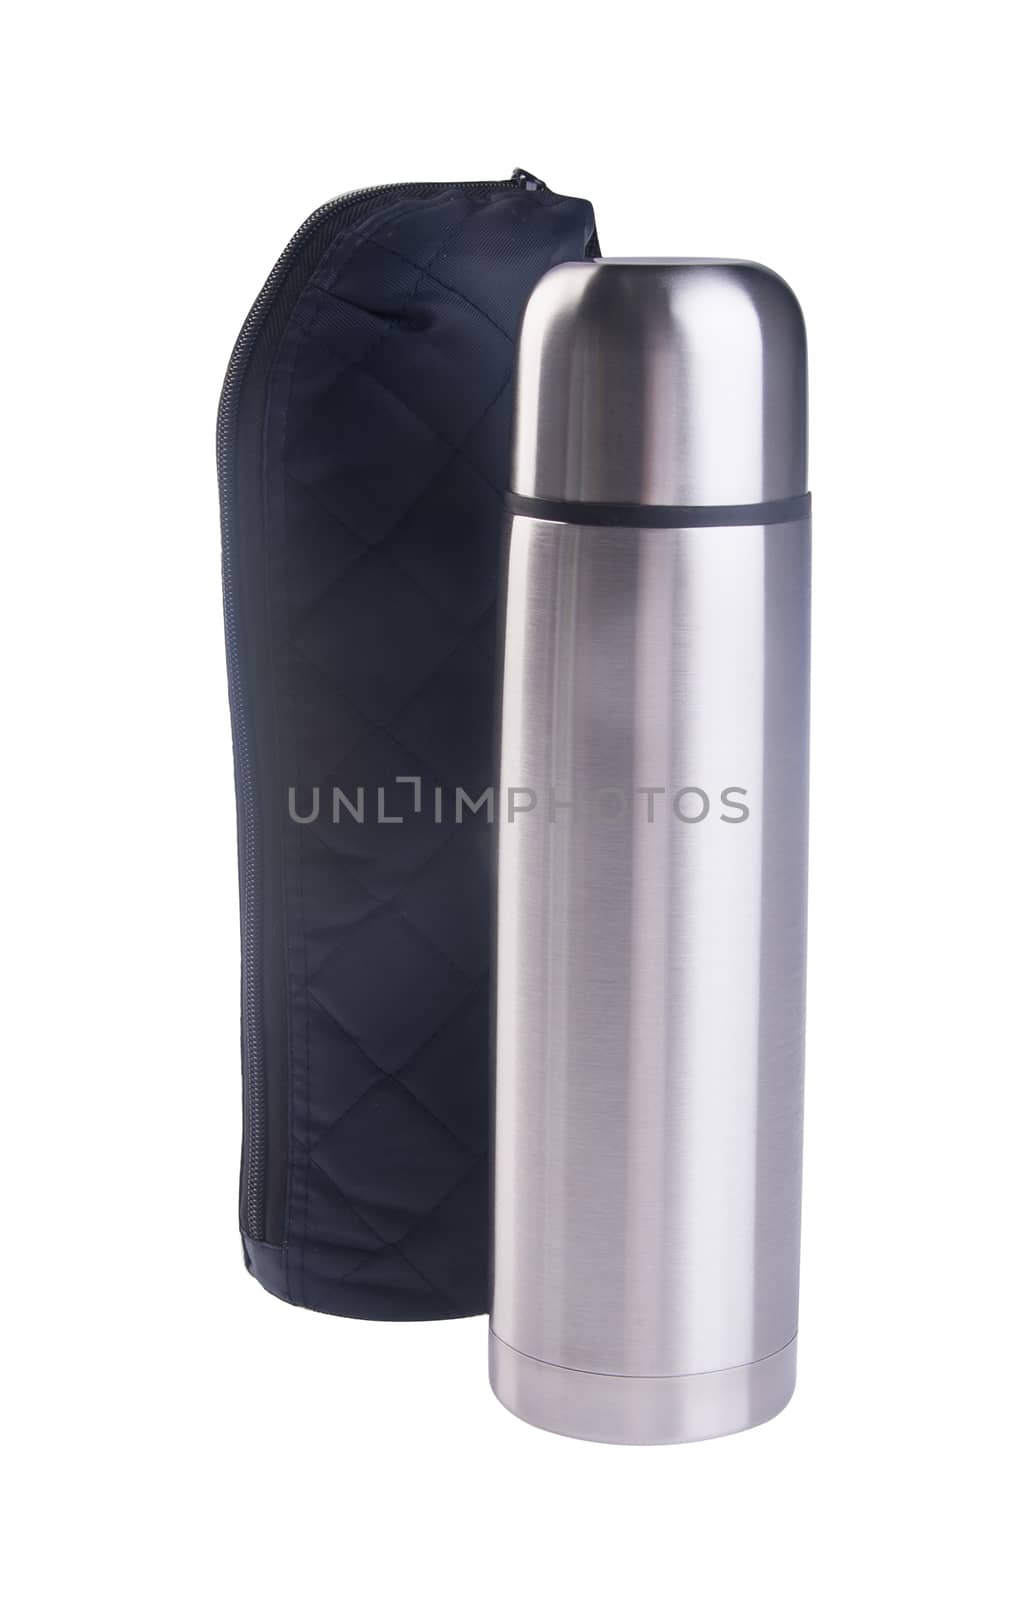 Thermo flask. Thermo flask on the background